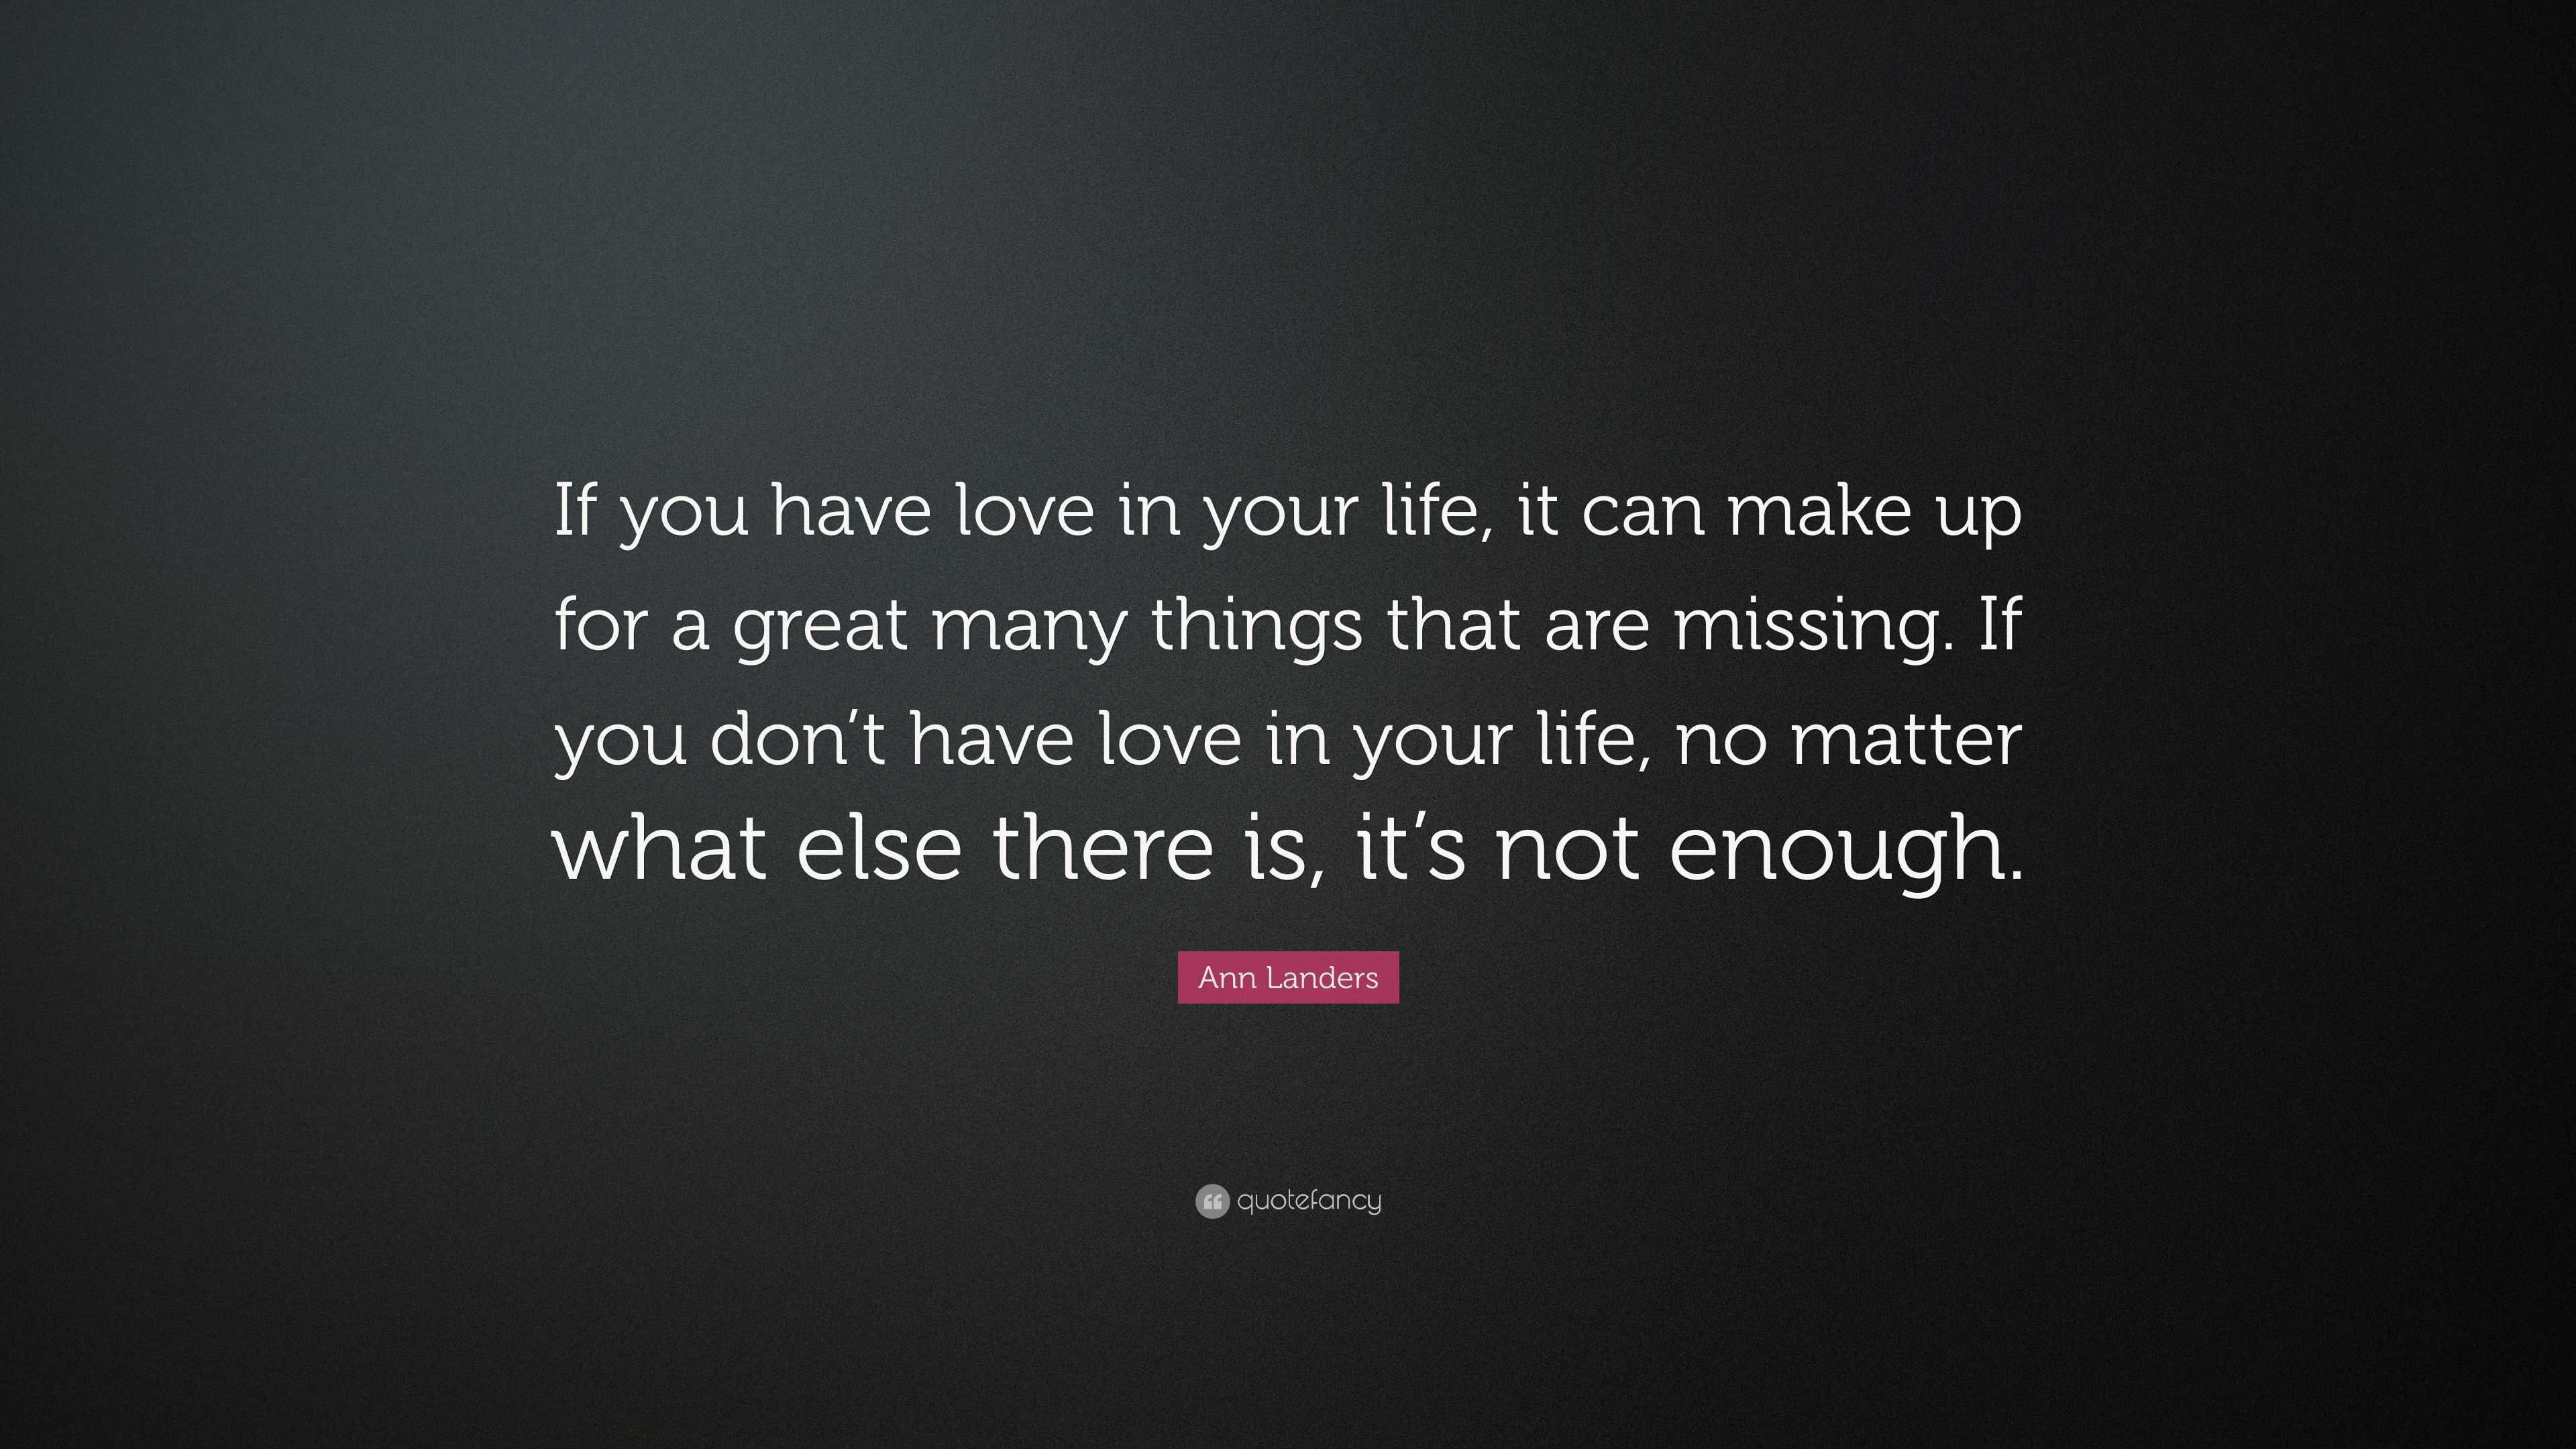 Ann Landers Quote: “If you have love in your life, it can make up for a ...